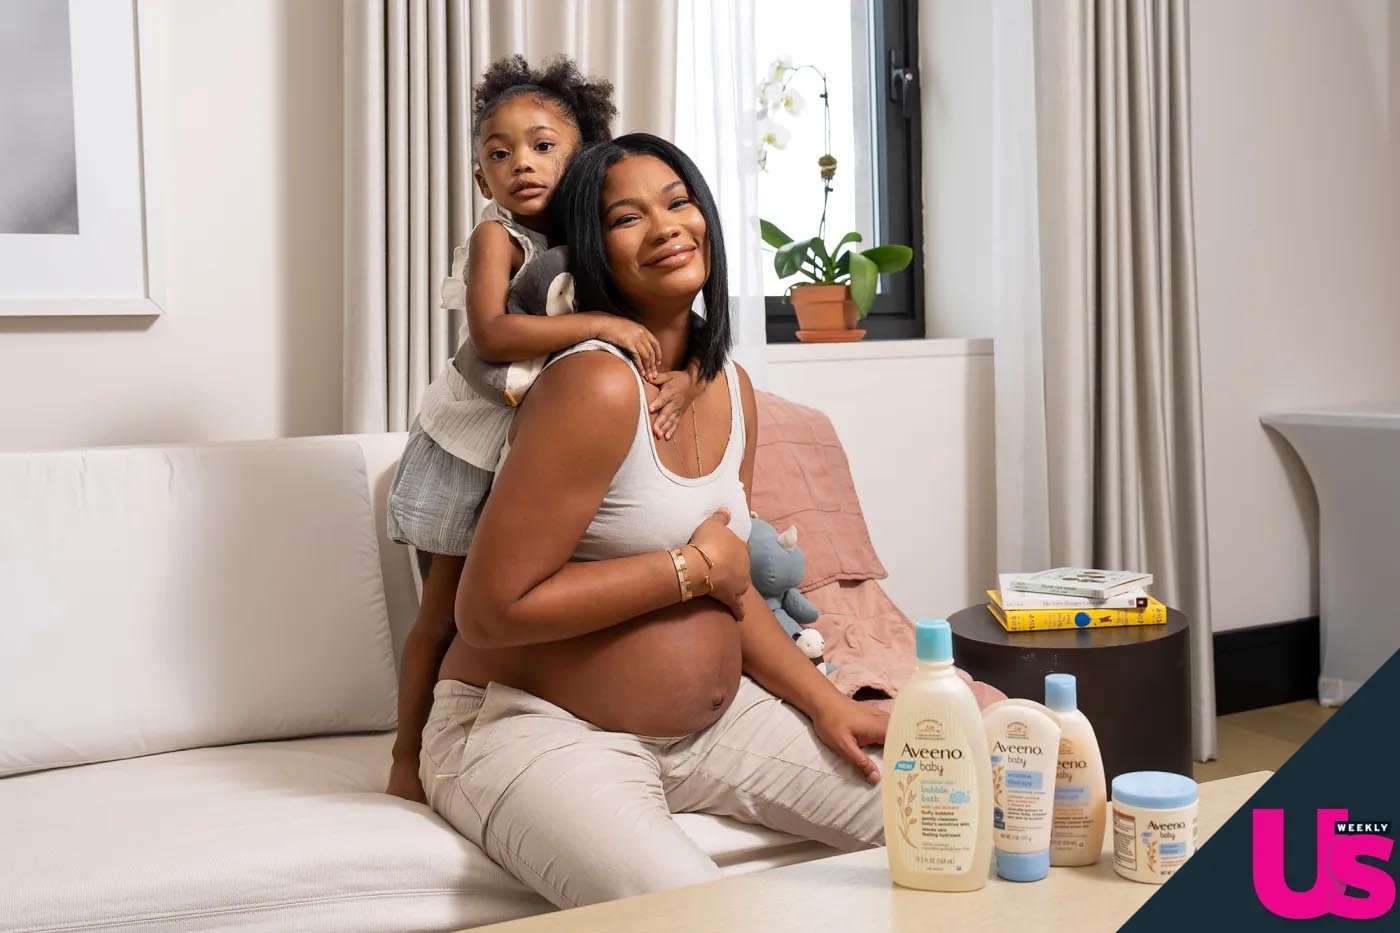 How-Pregnant-Chanel-Iman-Fights-Challenging-Skin-Changes-Amid-Her-Daughters-Own-Battles-With-Eczema-02.jpg.jpg